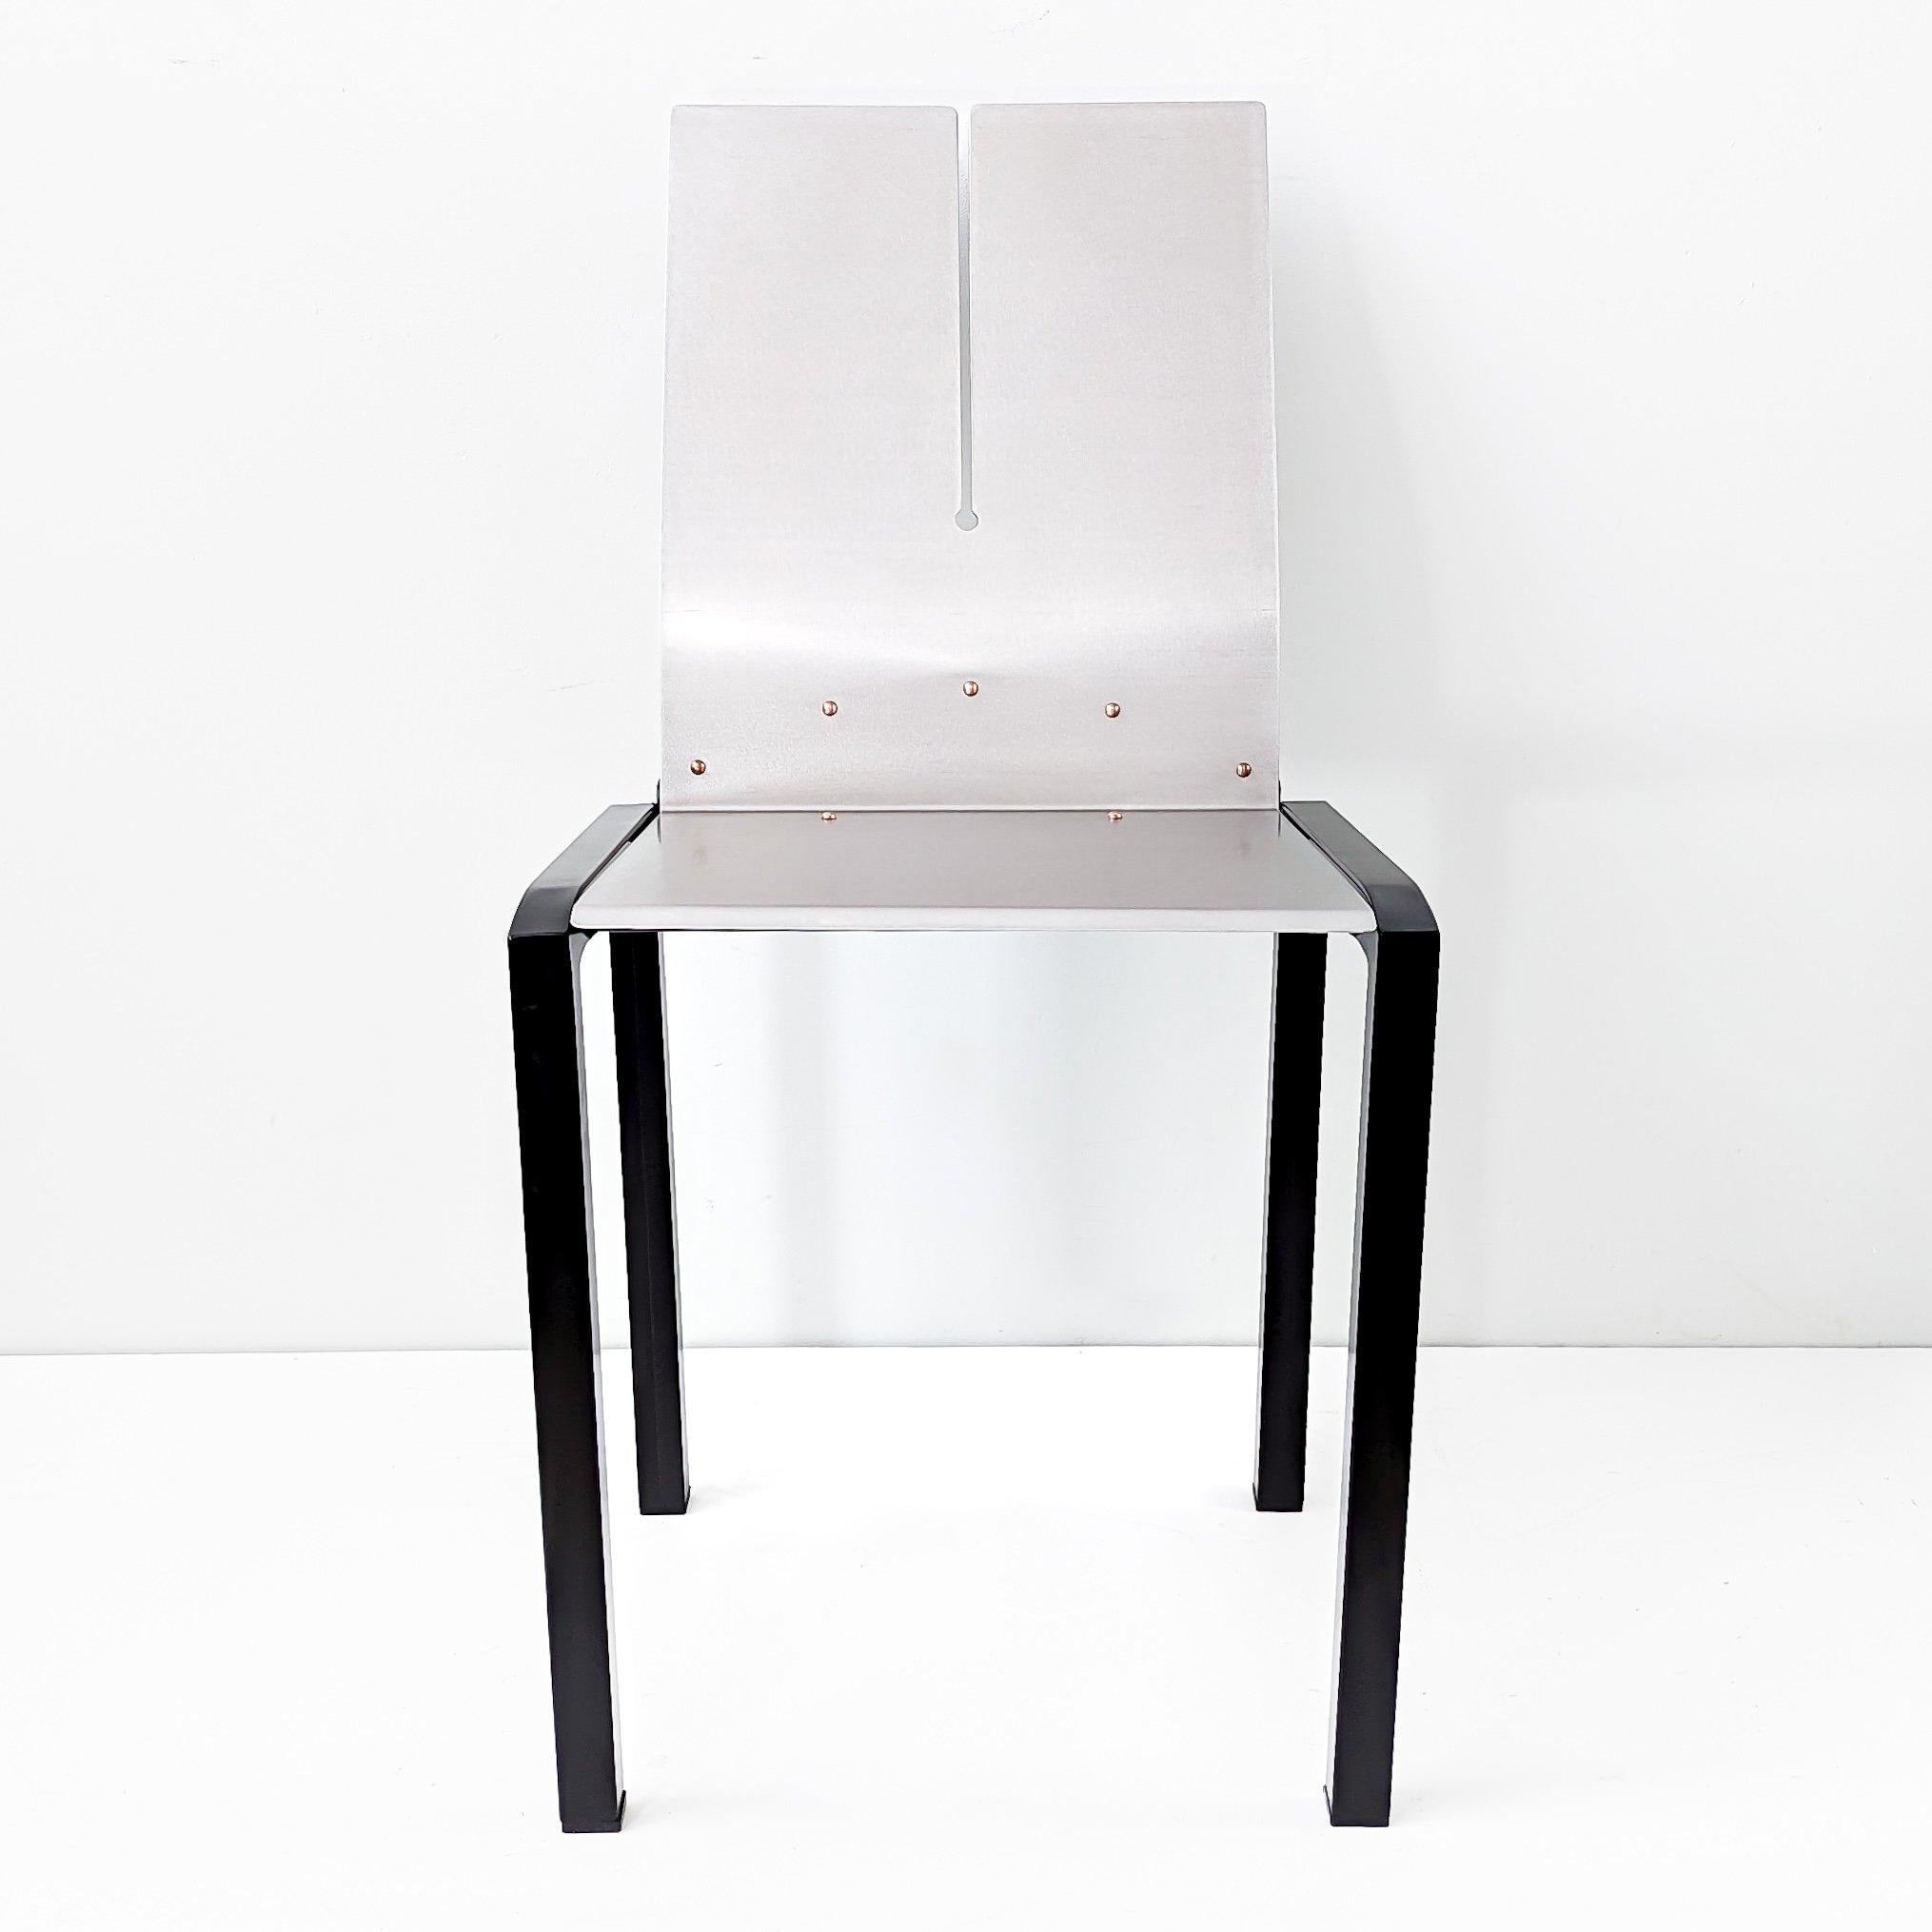 Set of 4 Metal 'Blade' Chairs By Maurizio Peregalli , Italy / C.1980 For Sale 1